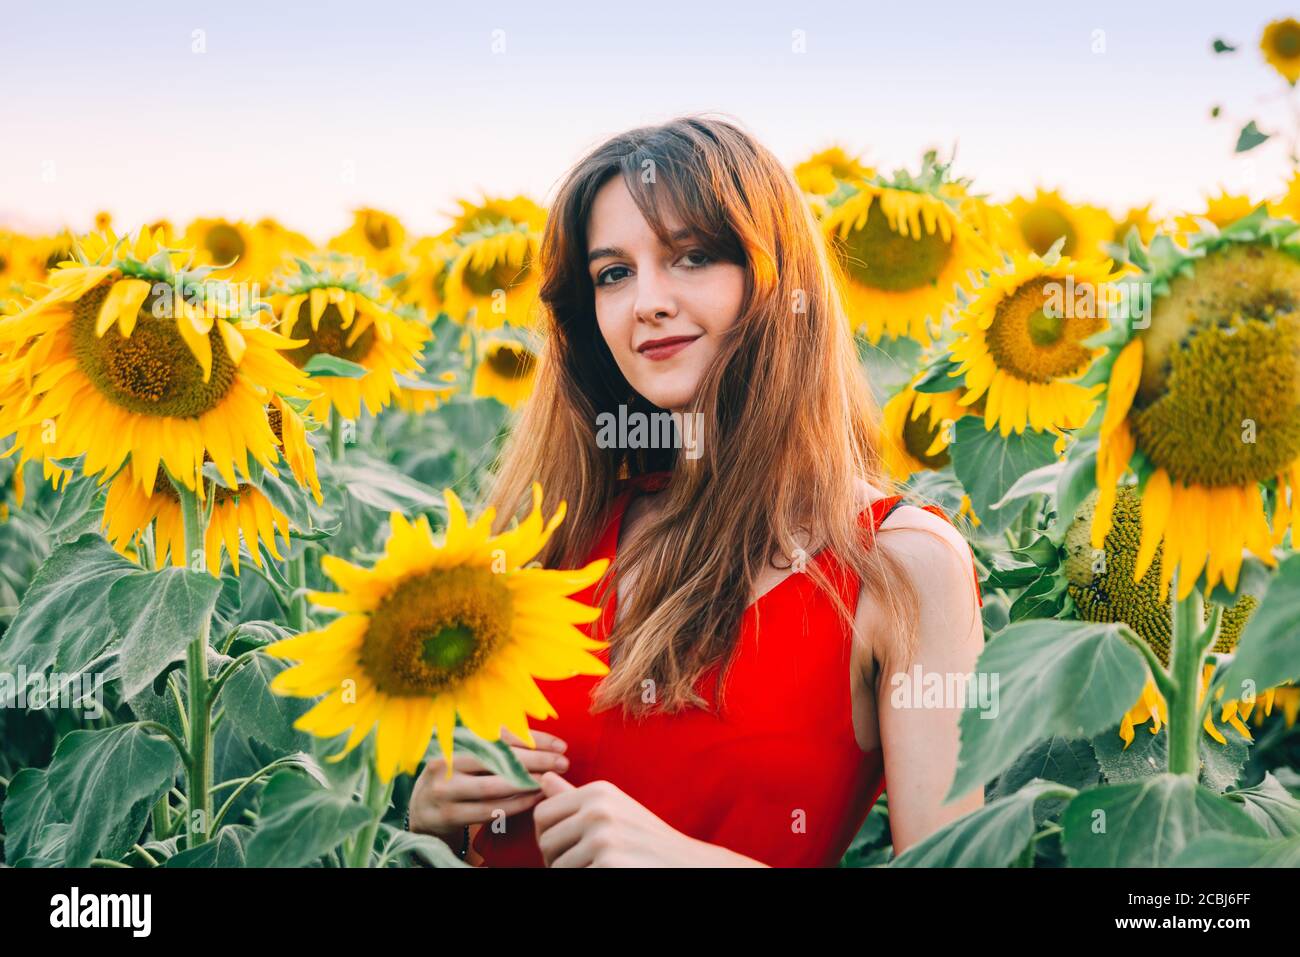 woman with red dress in sunflowers field. Stock Photo